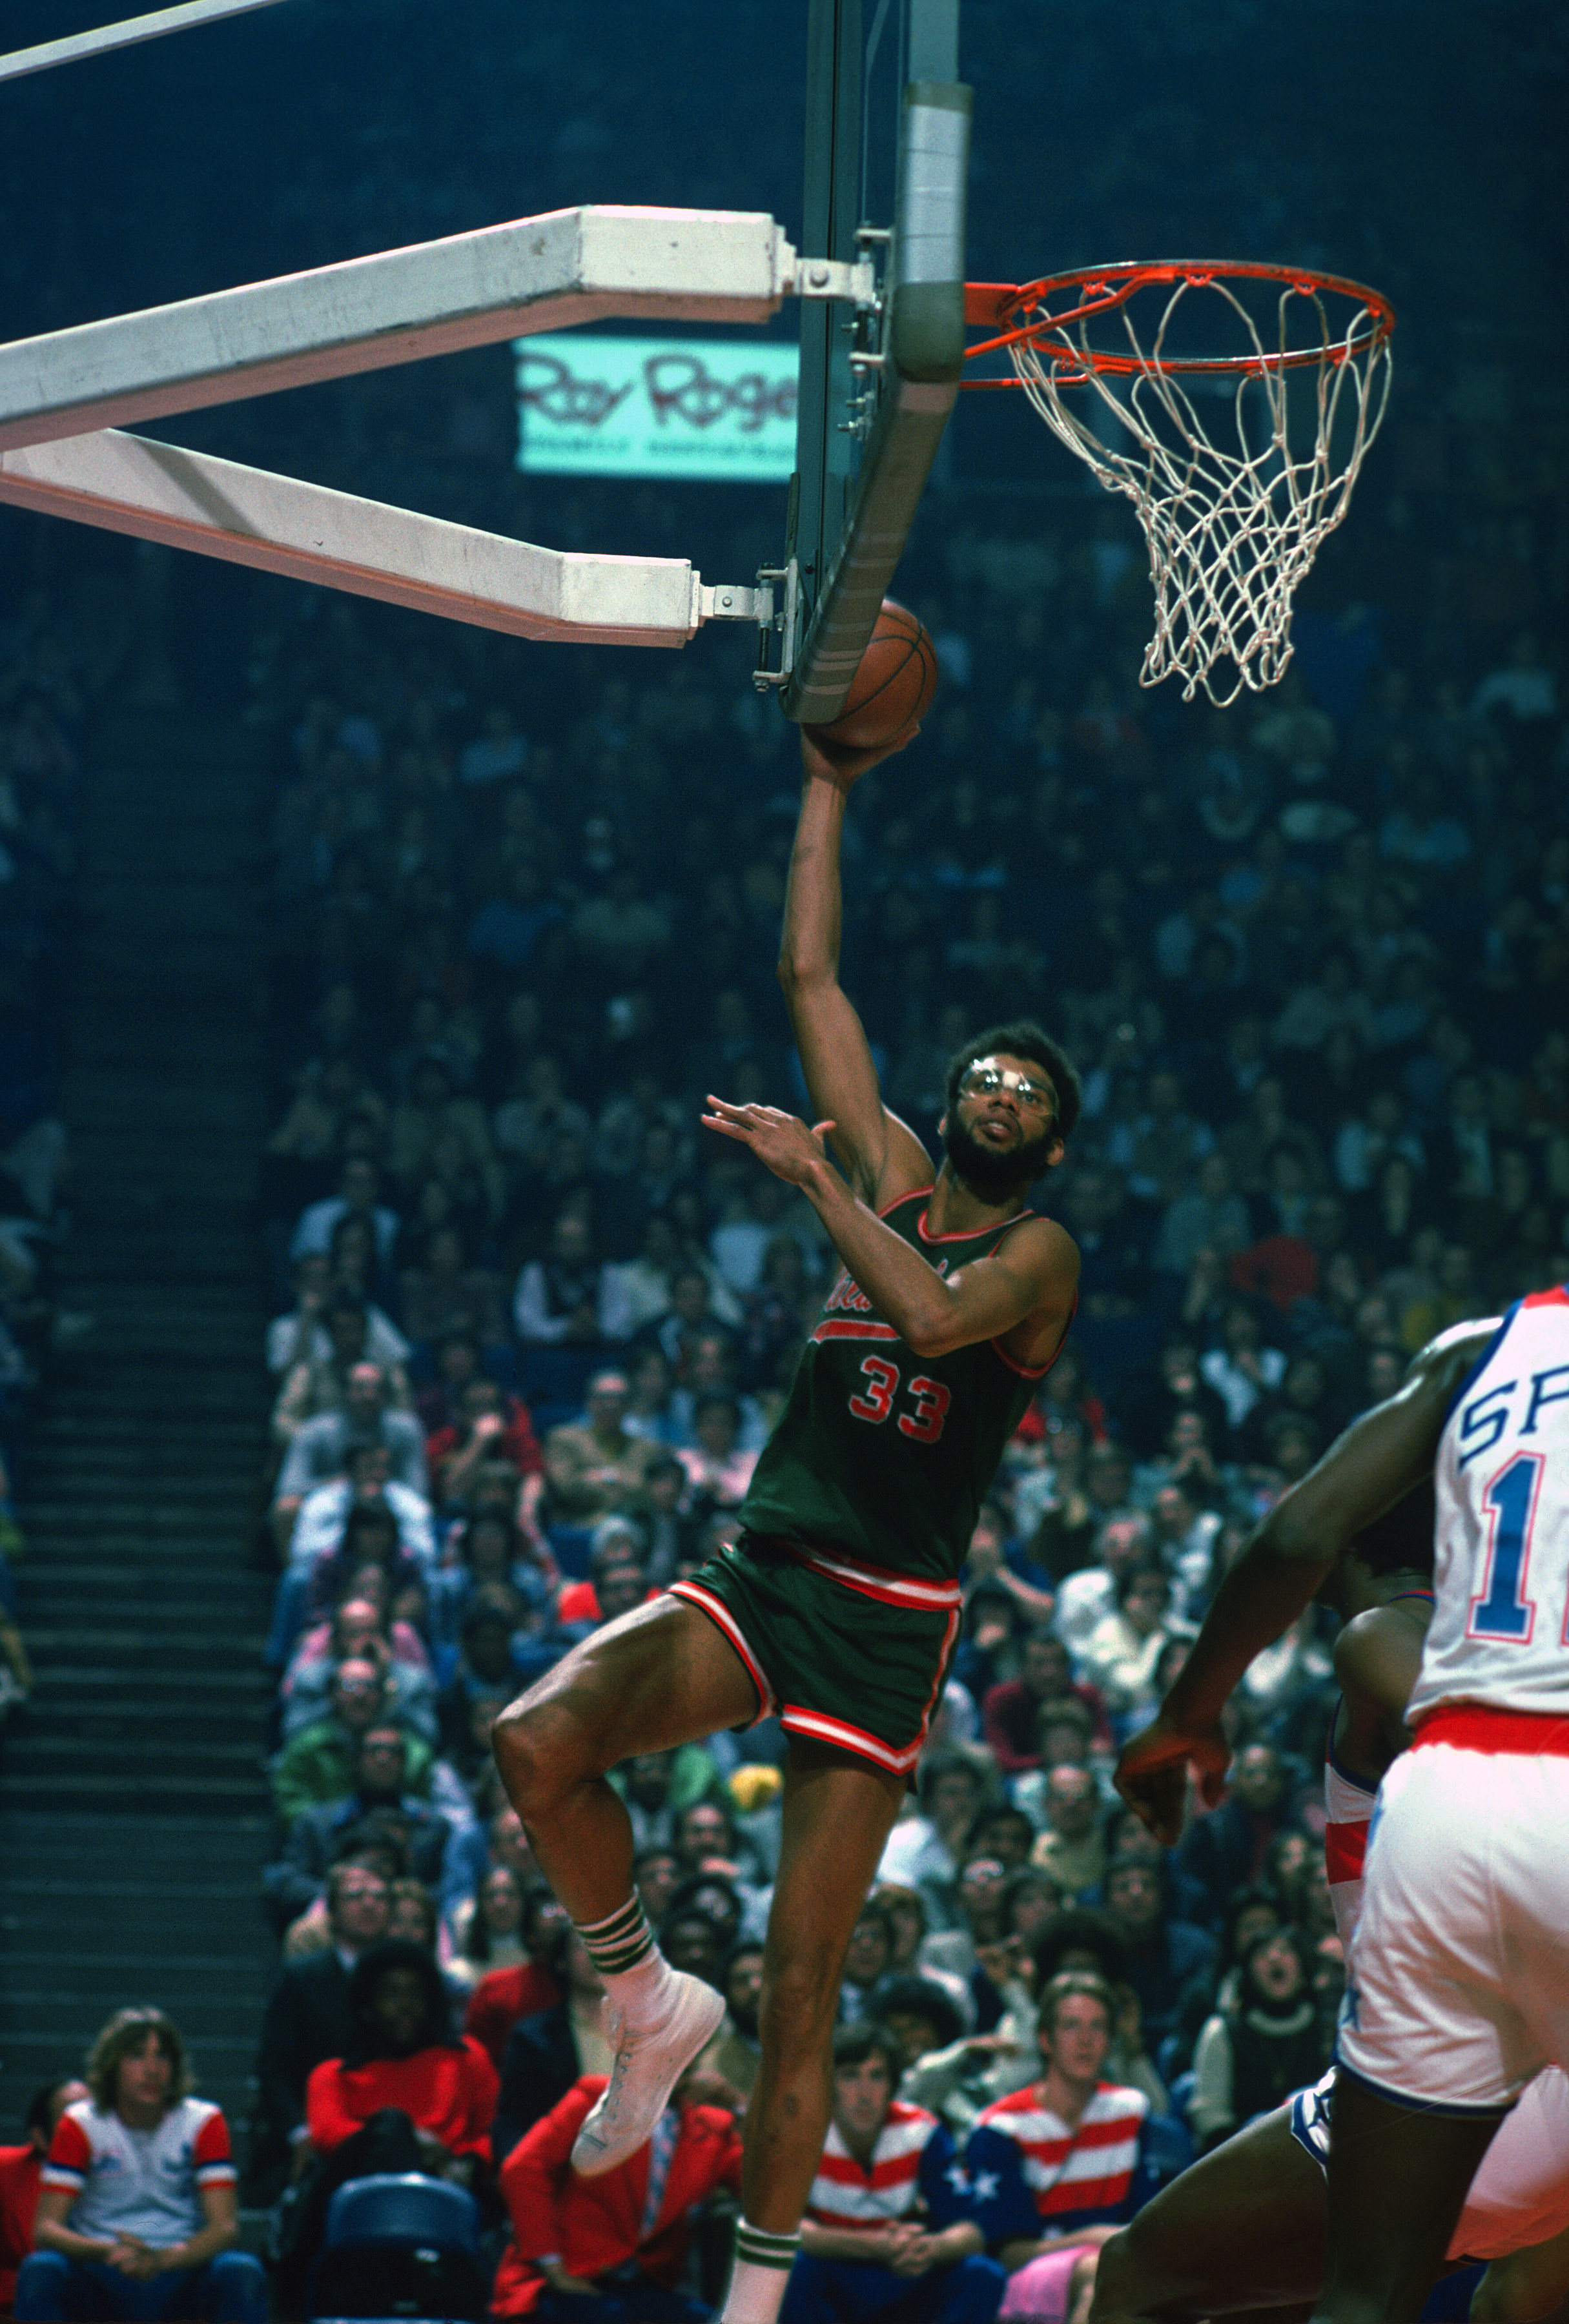 This is a photo of Kareem Abdul Jabbar in his 1975 season with the Bucks.